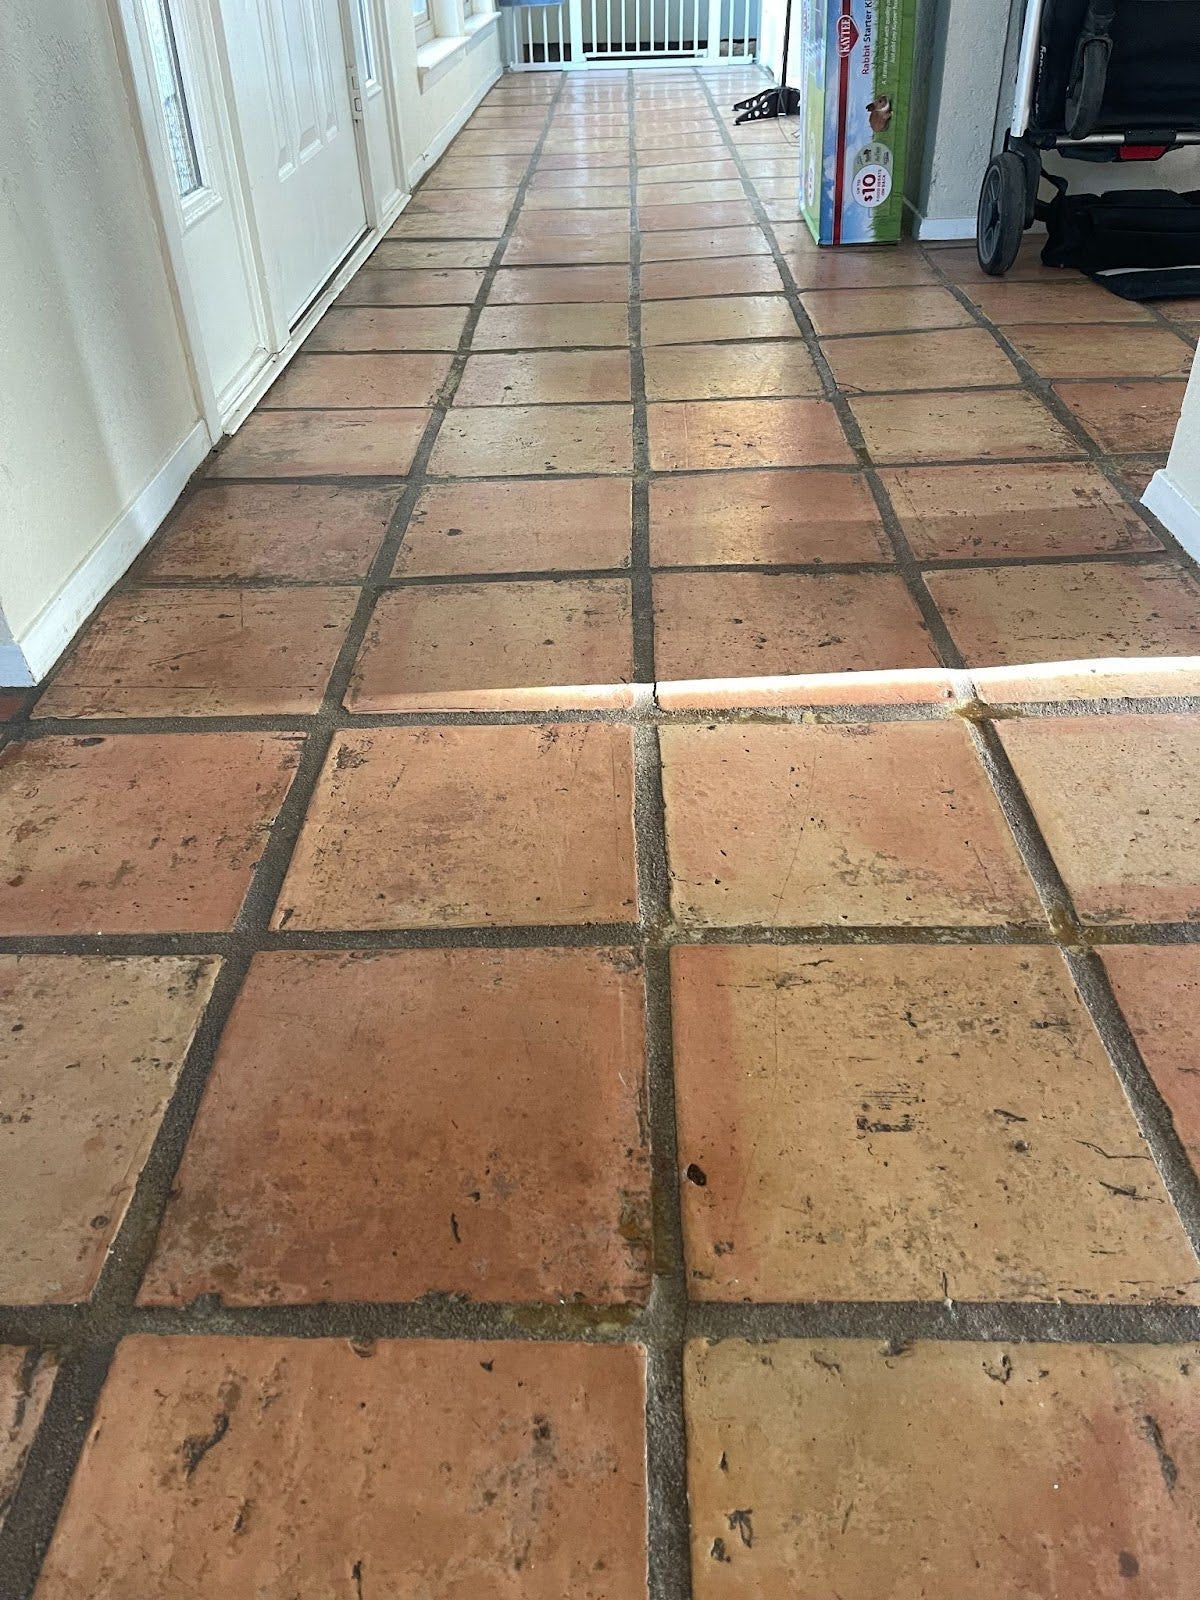 How to blend old terracotta tiles